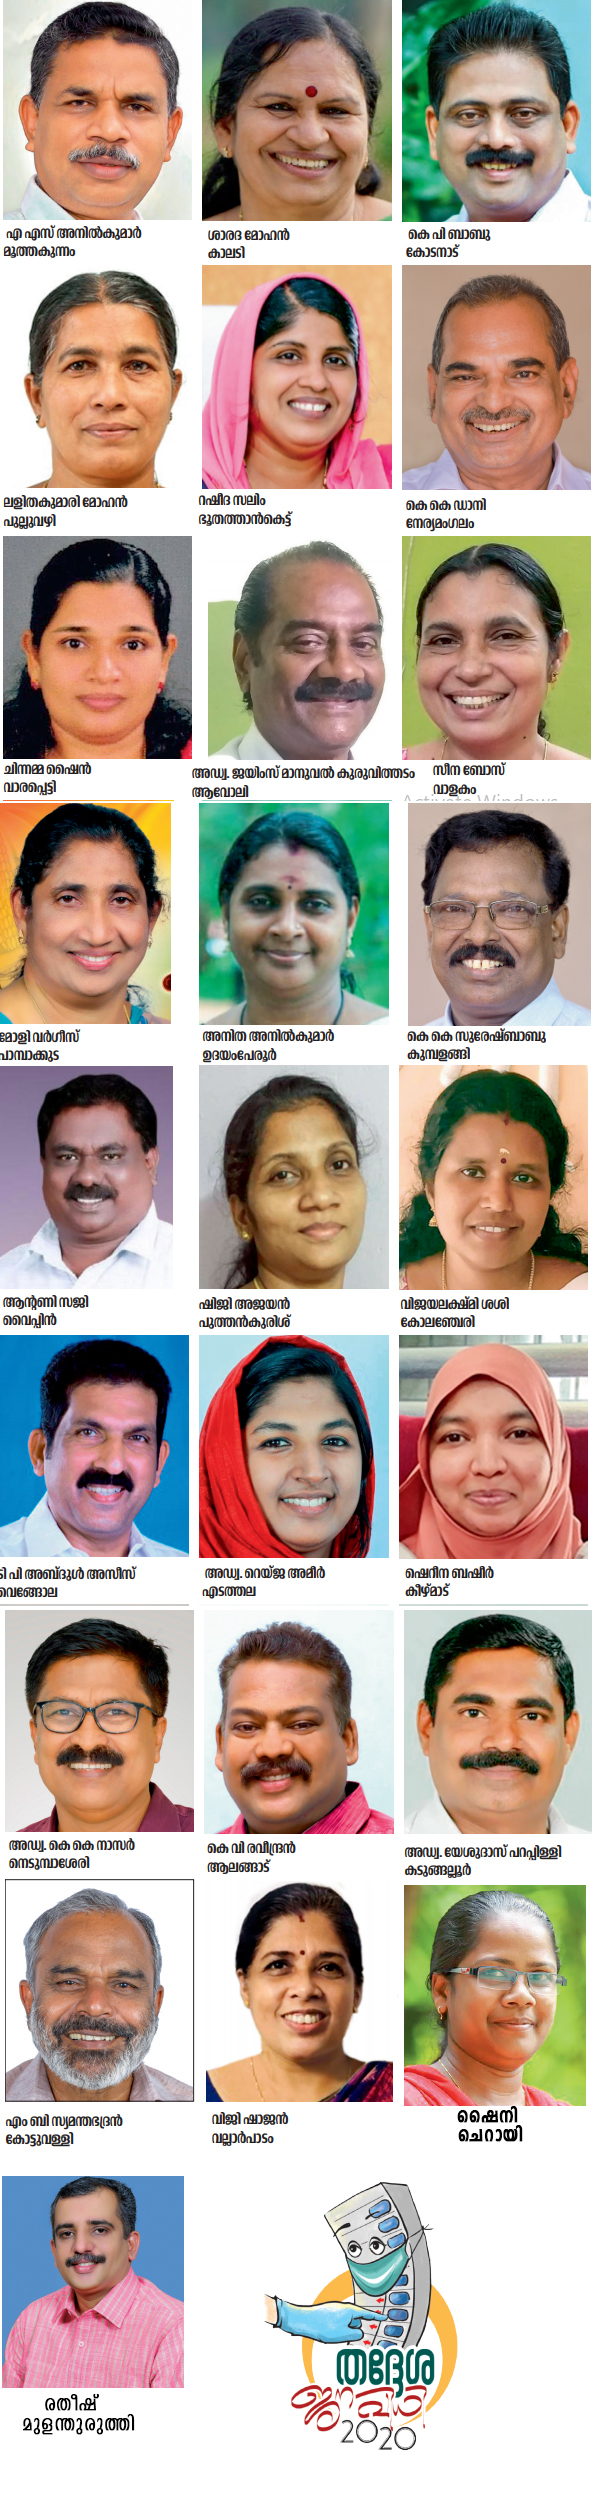 Ldf Announces Election Candidates For Corporation District Panchayat In Ernakulam Kerala Deshabhimani Friday Nov 13 2020 This page contains a list of all candidates who ran in the 2020 congress elections. ldf announces election candidates for